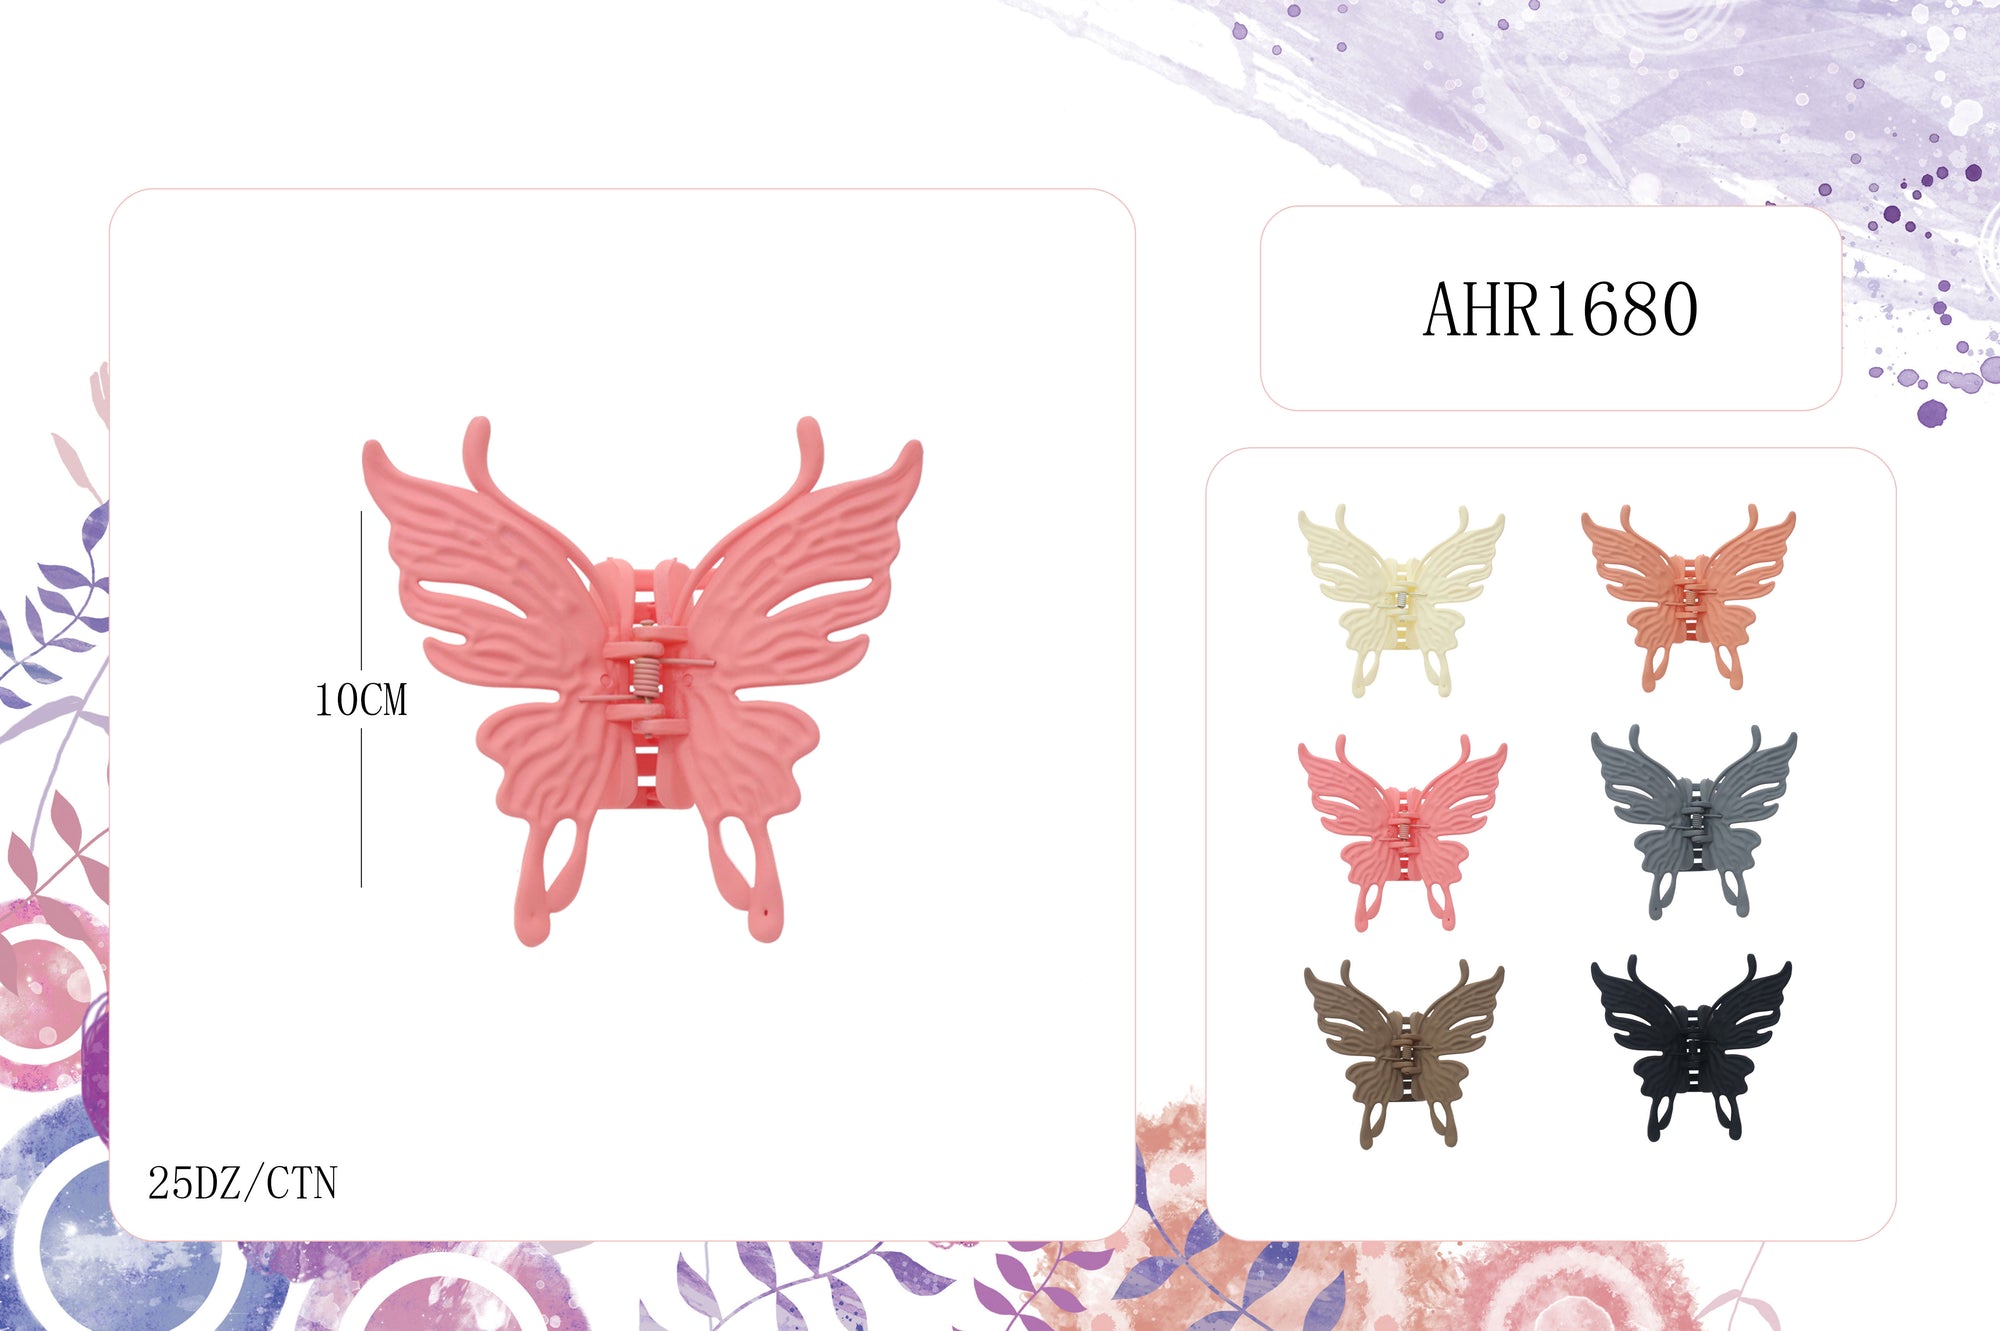 Fashion Butterfly Hairclips #AHR1680 - Assort (12PC)